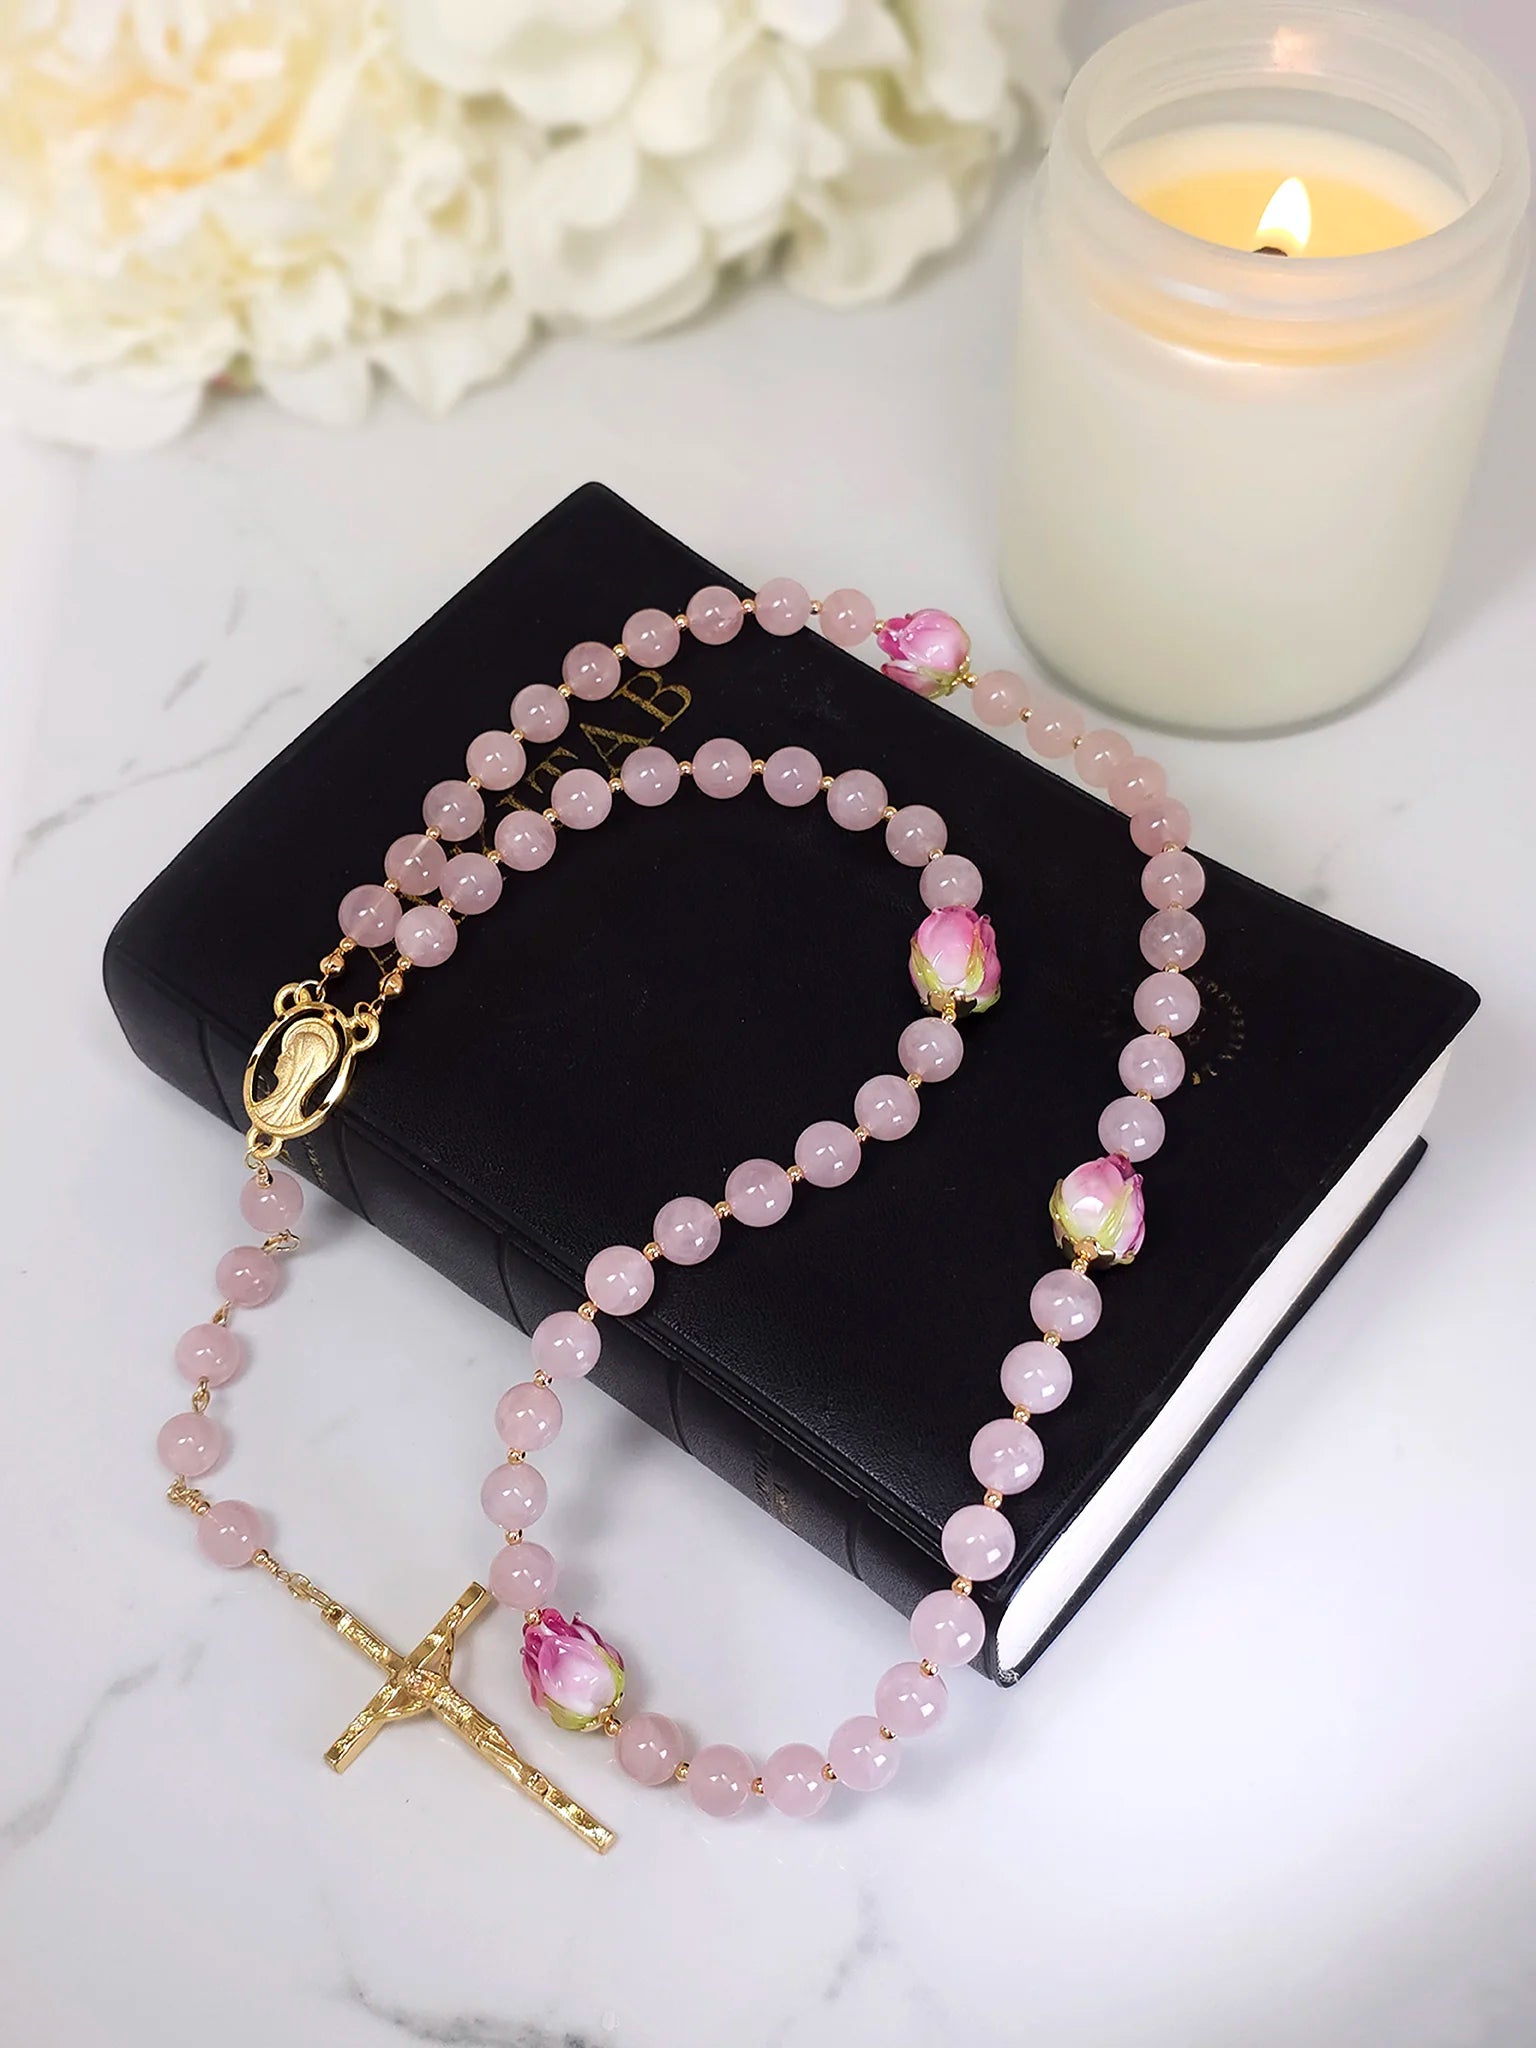 Rosary necklace emphasizing a gold-plated Madonna medal amidst pink quartz beads, draped on a white table.